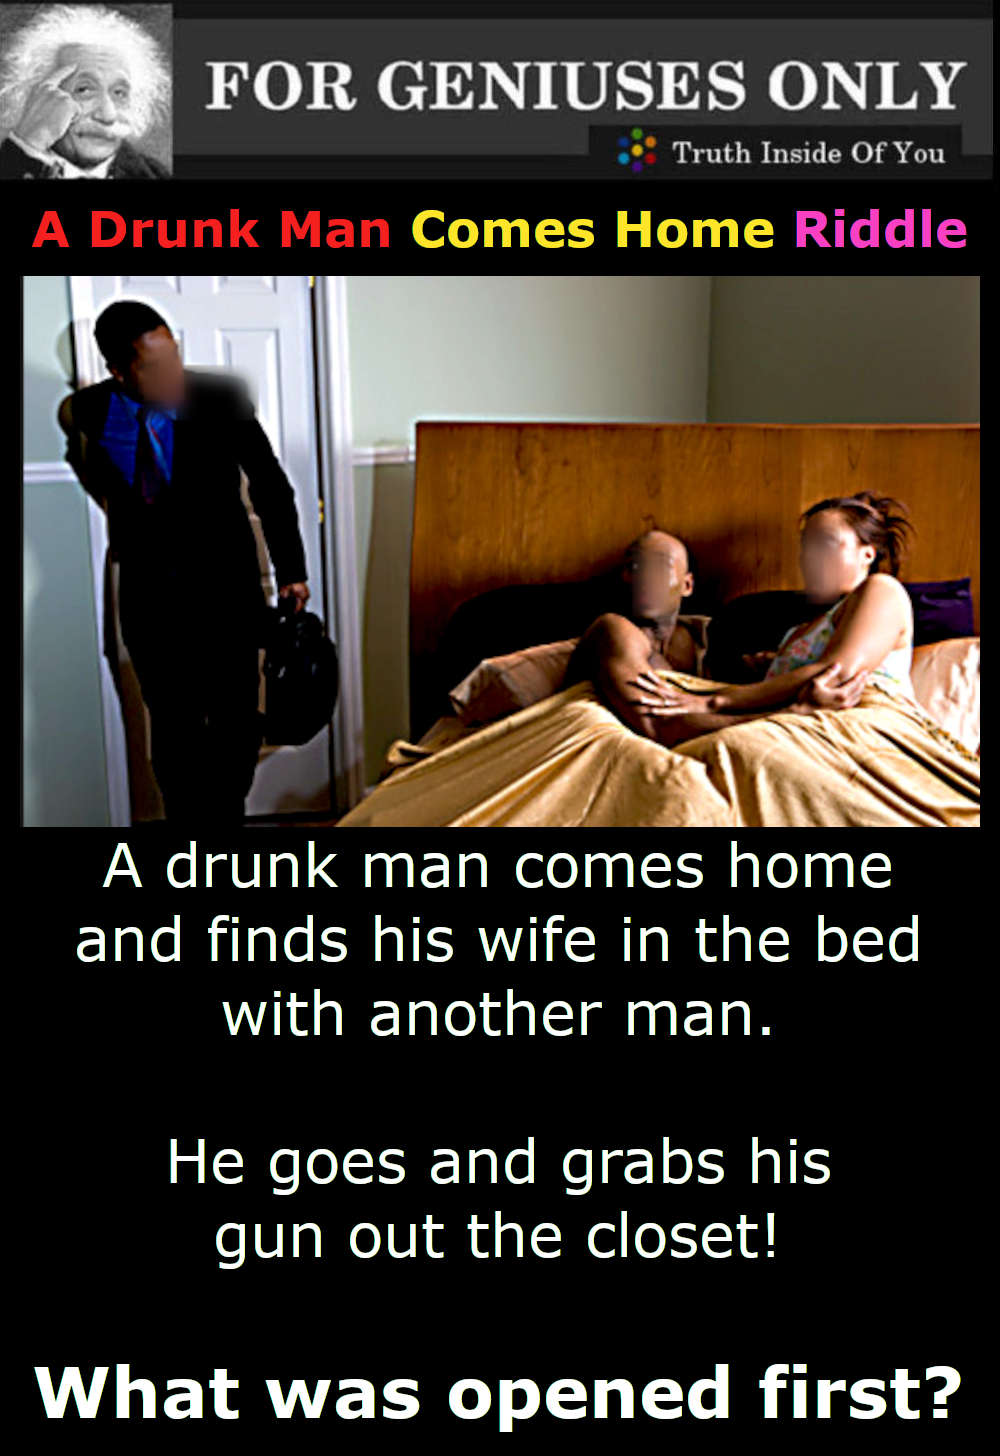 A Drunk Man Comes Home Riddle